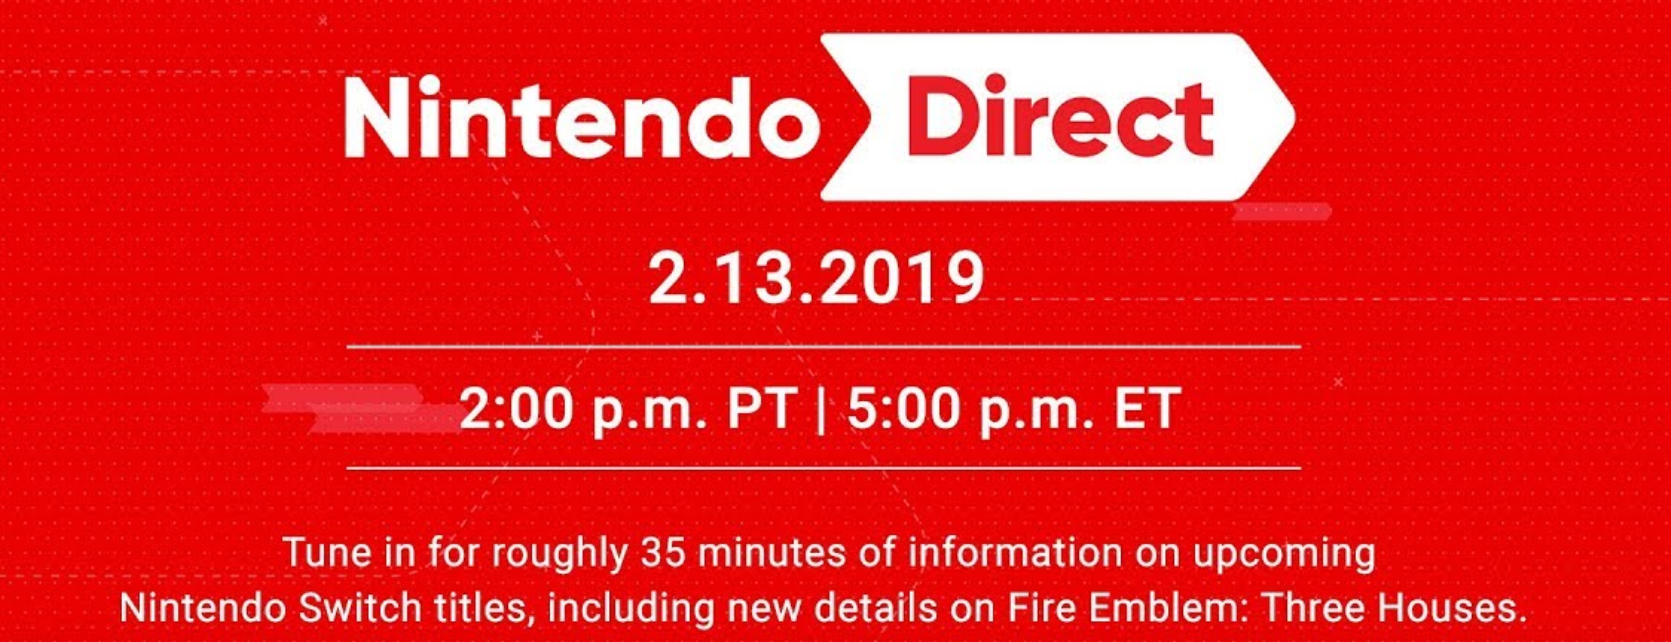 Nintendo Direct Confirmed for February 13 (Times in link)